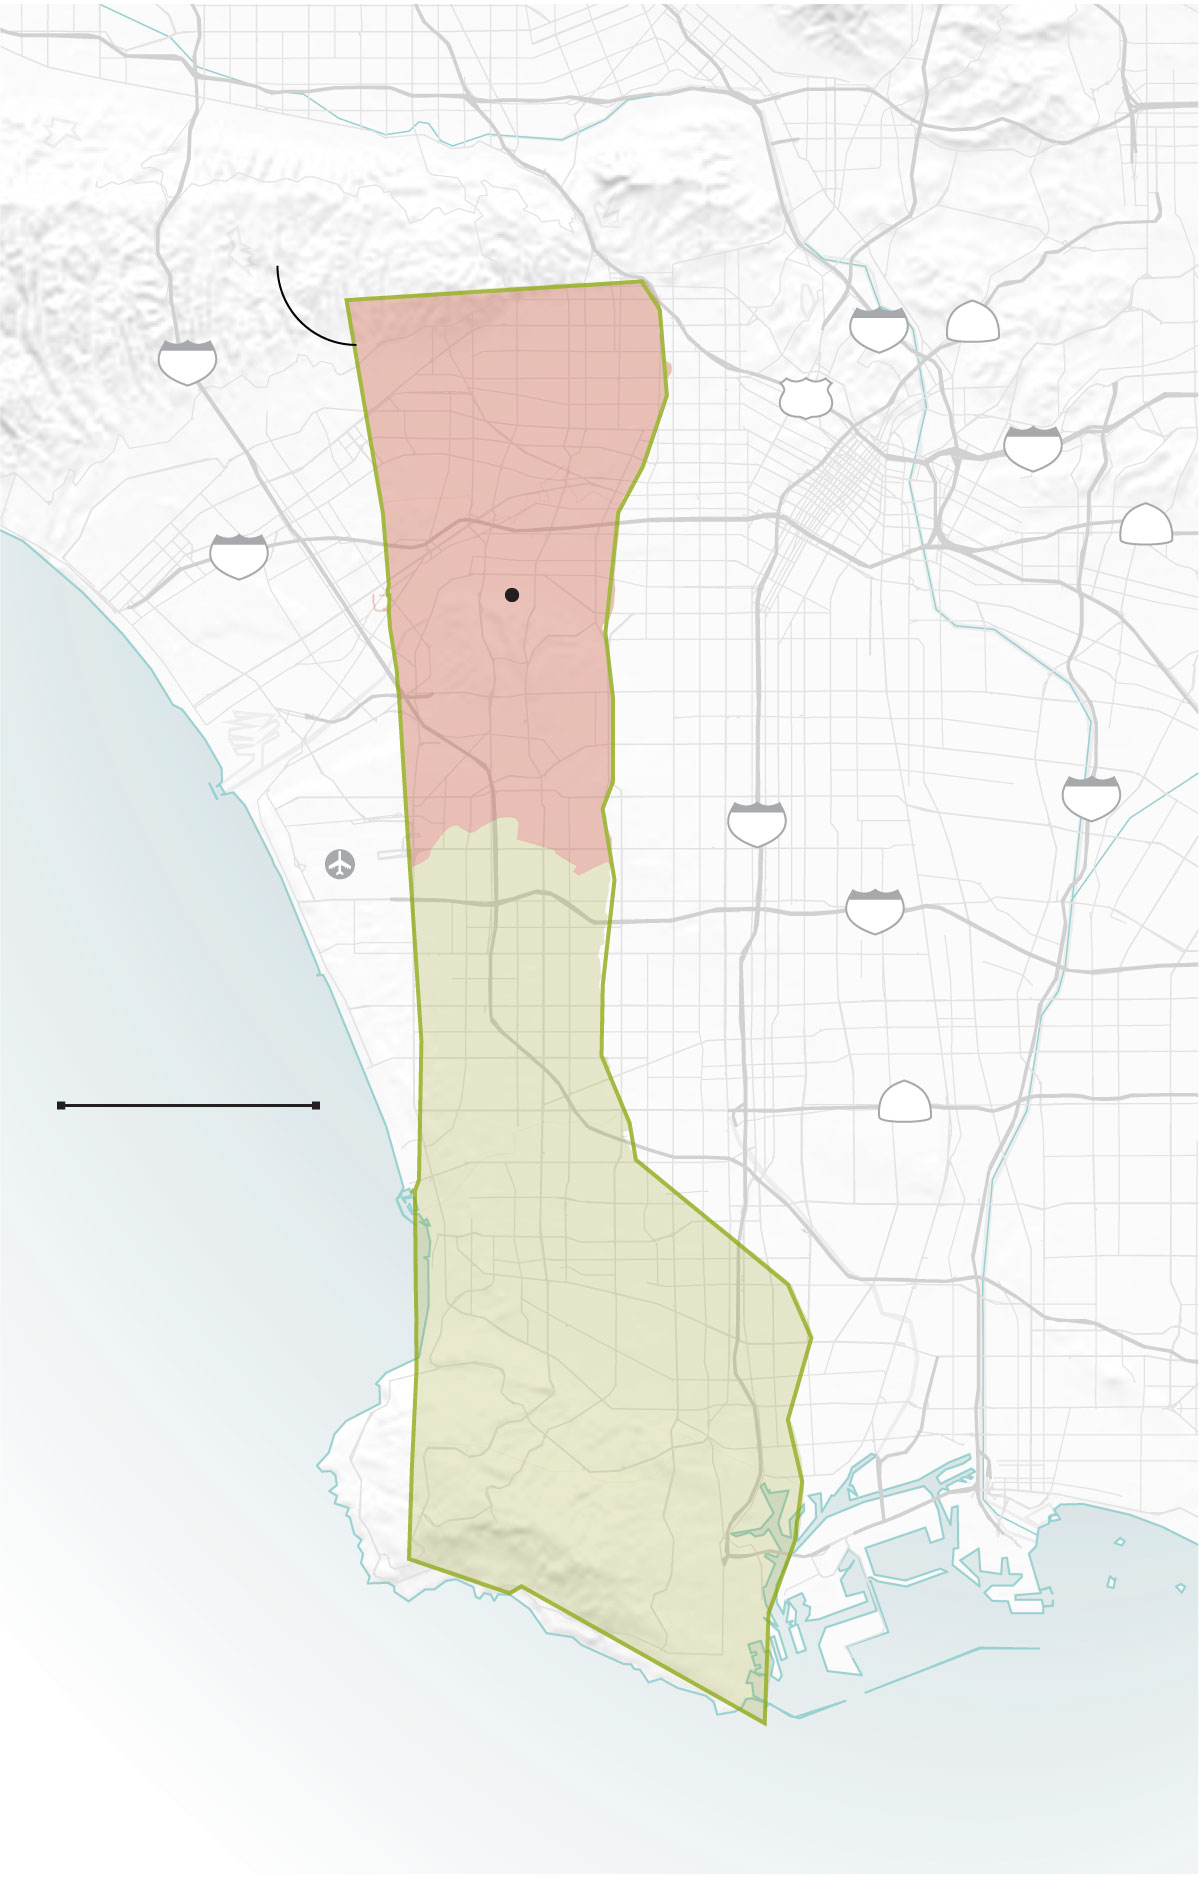 Map shows the evacuation area in Gaza Strip overlaid on the Los Angeles area for scale.